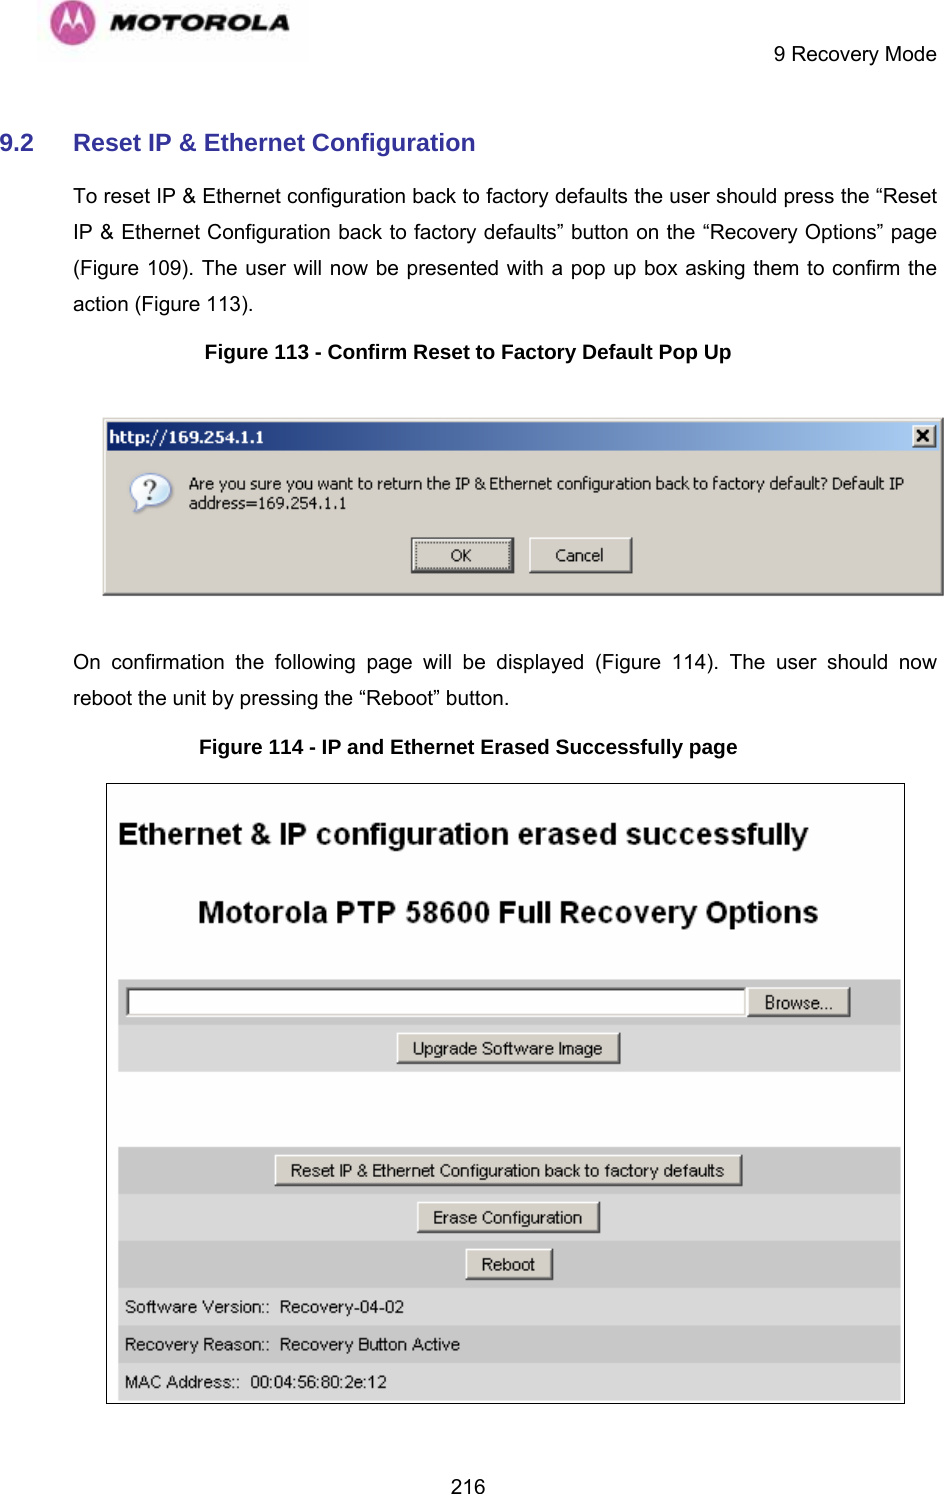     9 Recovery Mode  2169.2  Reset IP &amp; Ethernet Configuration To reset IP &amp; Ethernet configuration back to factory defaults the user should press the “Reset IP &amp; Ethernet Configuration back to factory defaults” button on the “Recovery Options” page (1Figure 109). The user will now be presented with a pop up box asking them to confirm the action (Figure 113). Figure 113 - Confirm Reset to Factory Default Pop Up  On confirmation the following page will be displayed (Figure 114). The user should now reboot the unit by pressing the “Reboot” button. Figure 114 - IP and Ethernet Erased Successfully page  